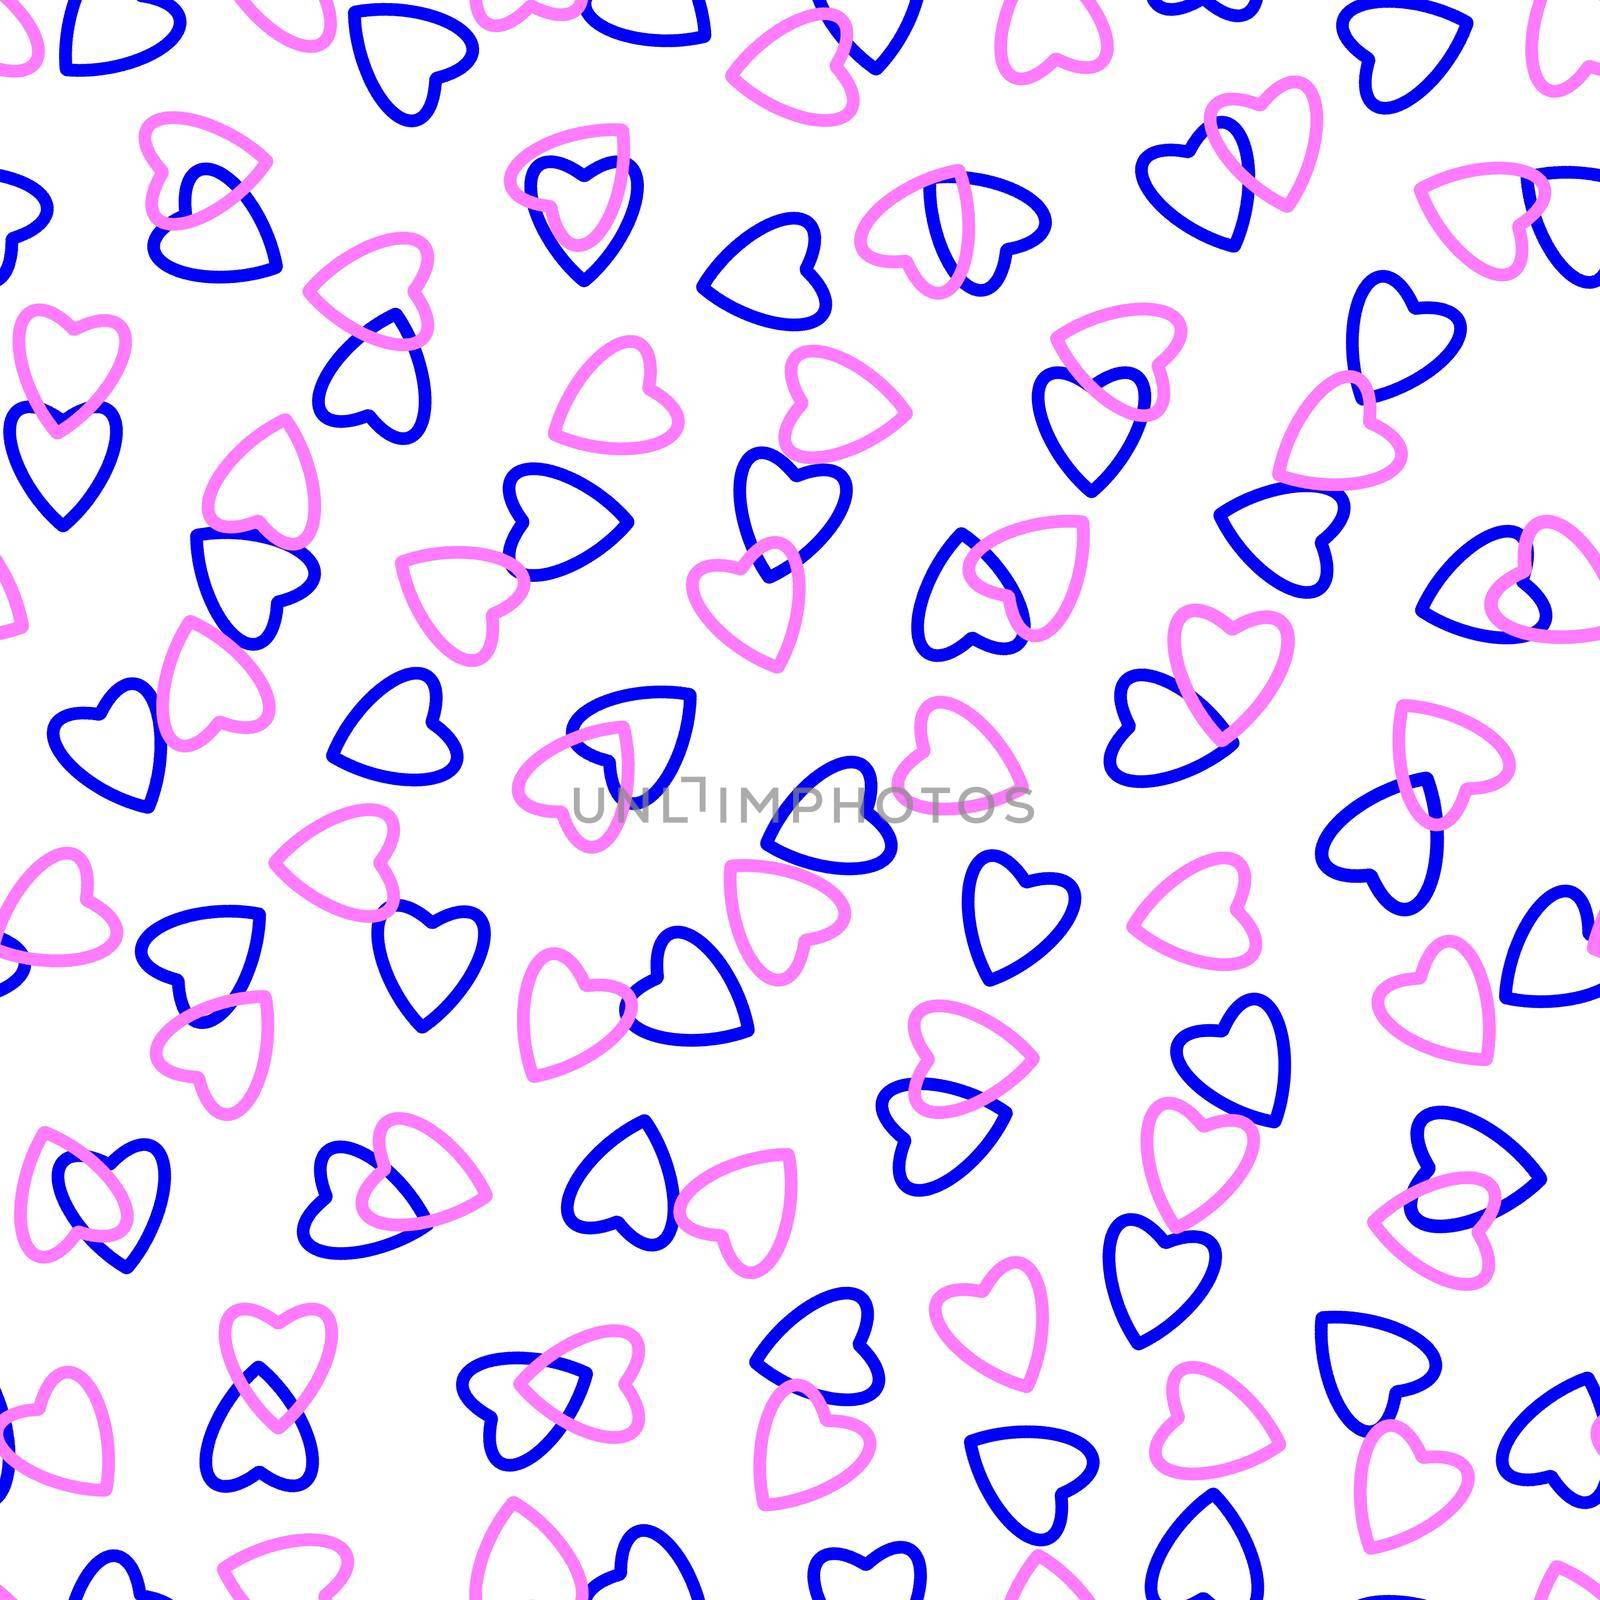 Simple hearts seamless pattern,endless chaotic texture made of tiny heart silhouettes.Valentines,mothers day background.Great for Easter,wedding,scrapbook,gift wrapping paper,textiles.Blue,lilac,white by Angelsmoon